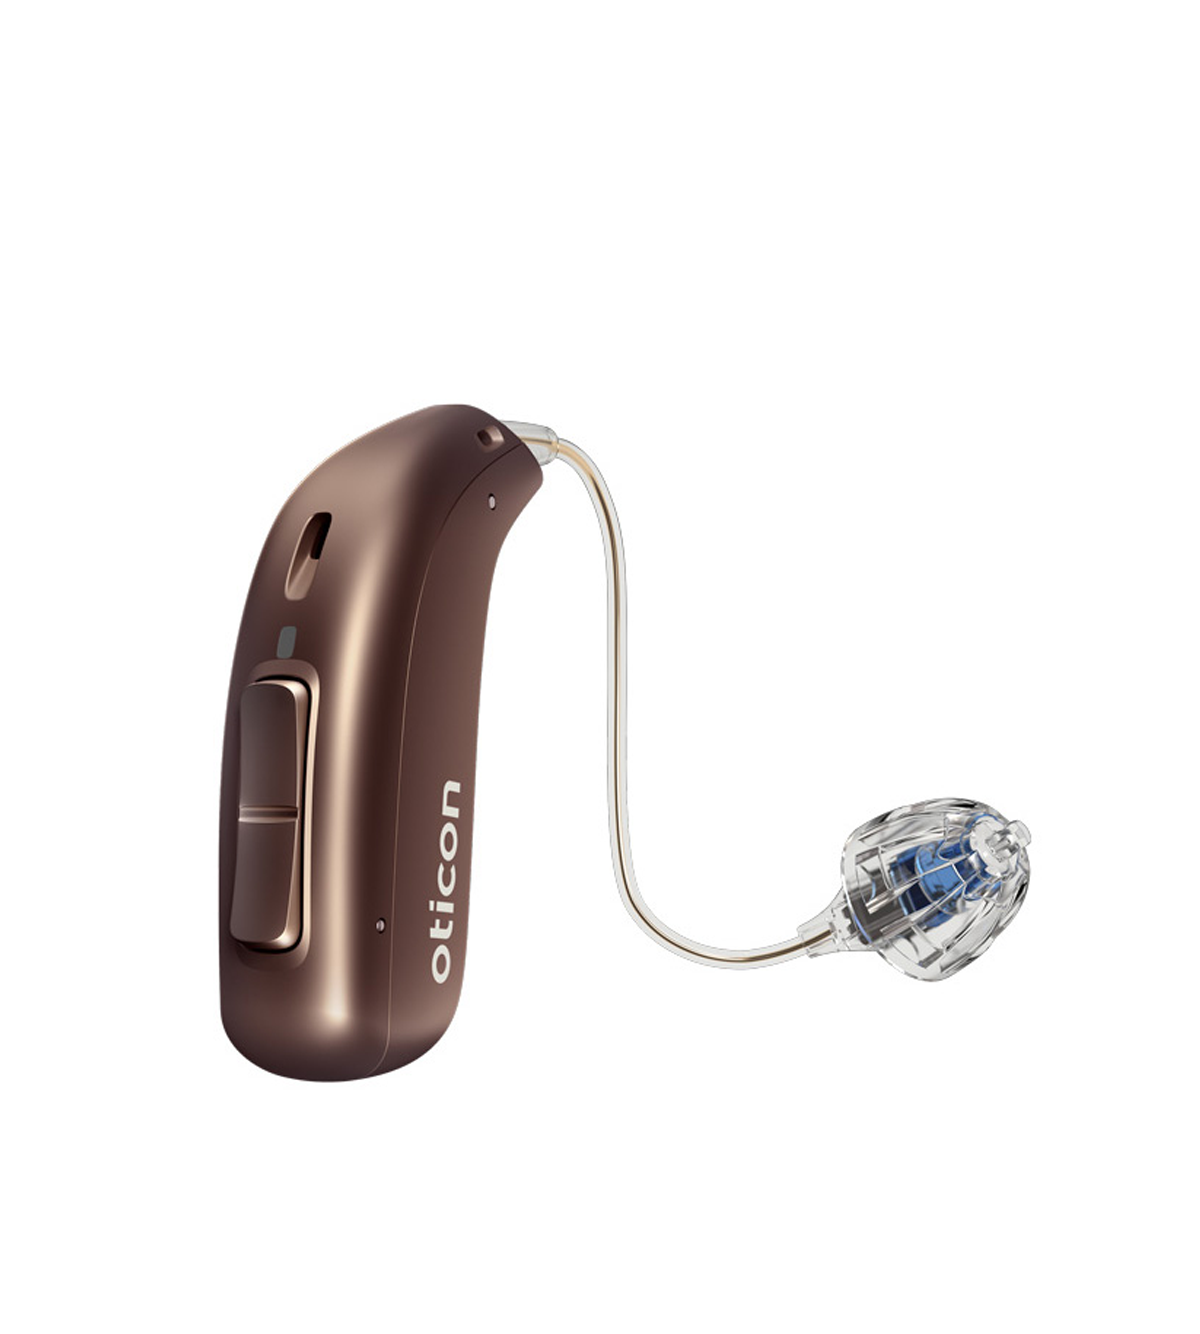 Oticon Real 1 Oticon Real 1 hearing aid models